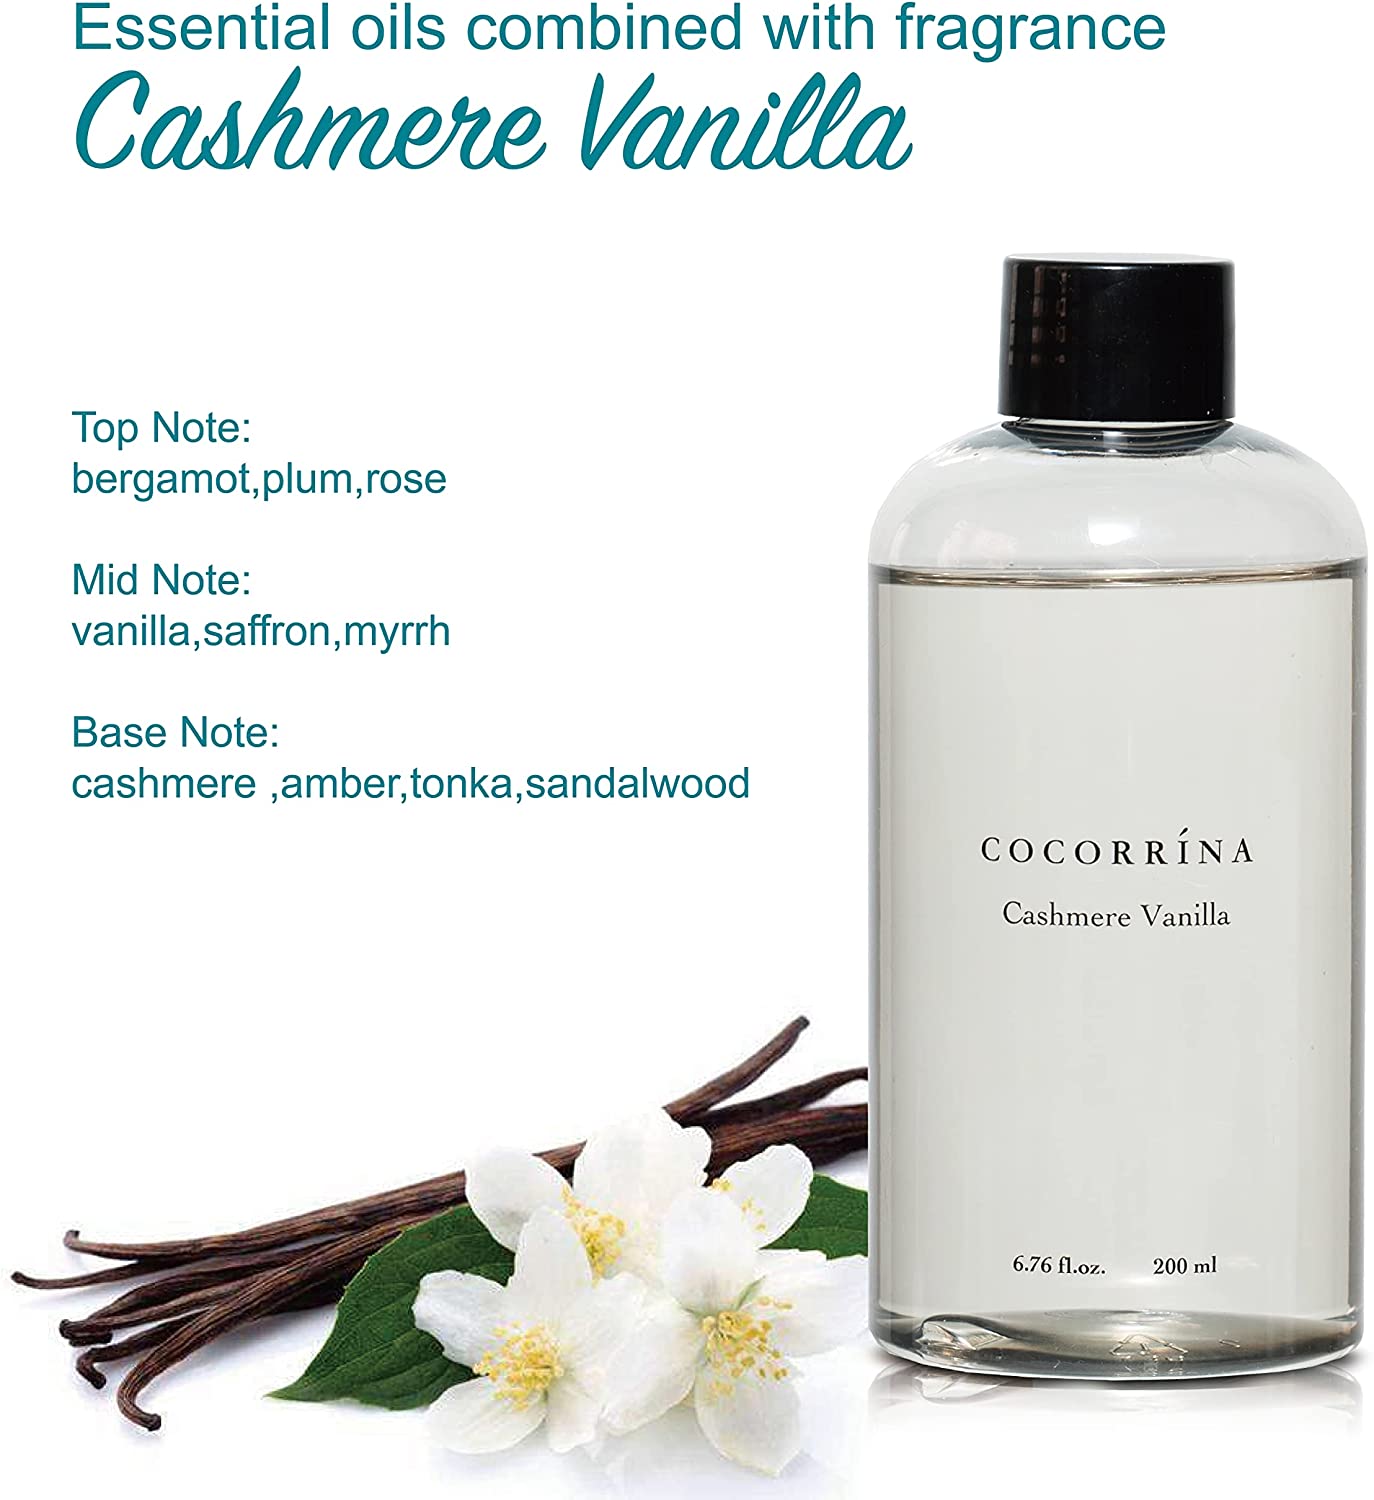 Cocorrína Cashmere Vanilla Scented Reed Diffuser Oil Refill with 6 Sticks